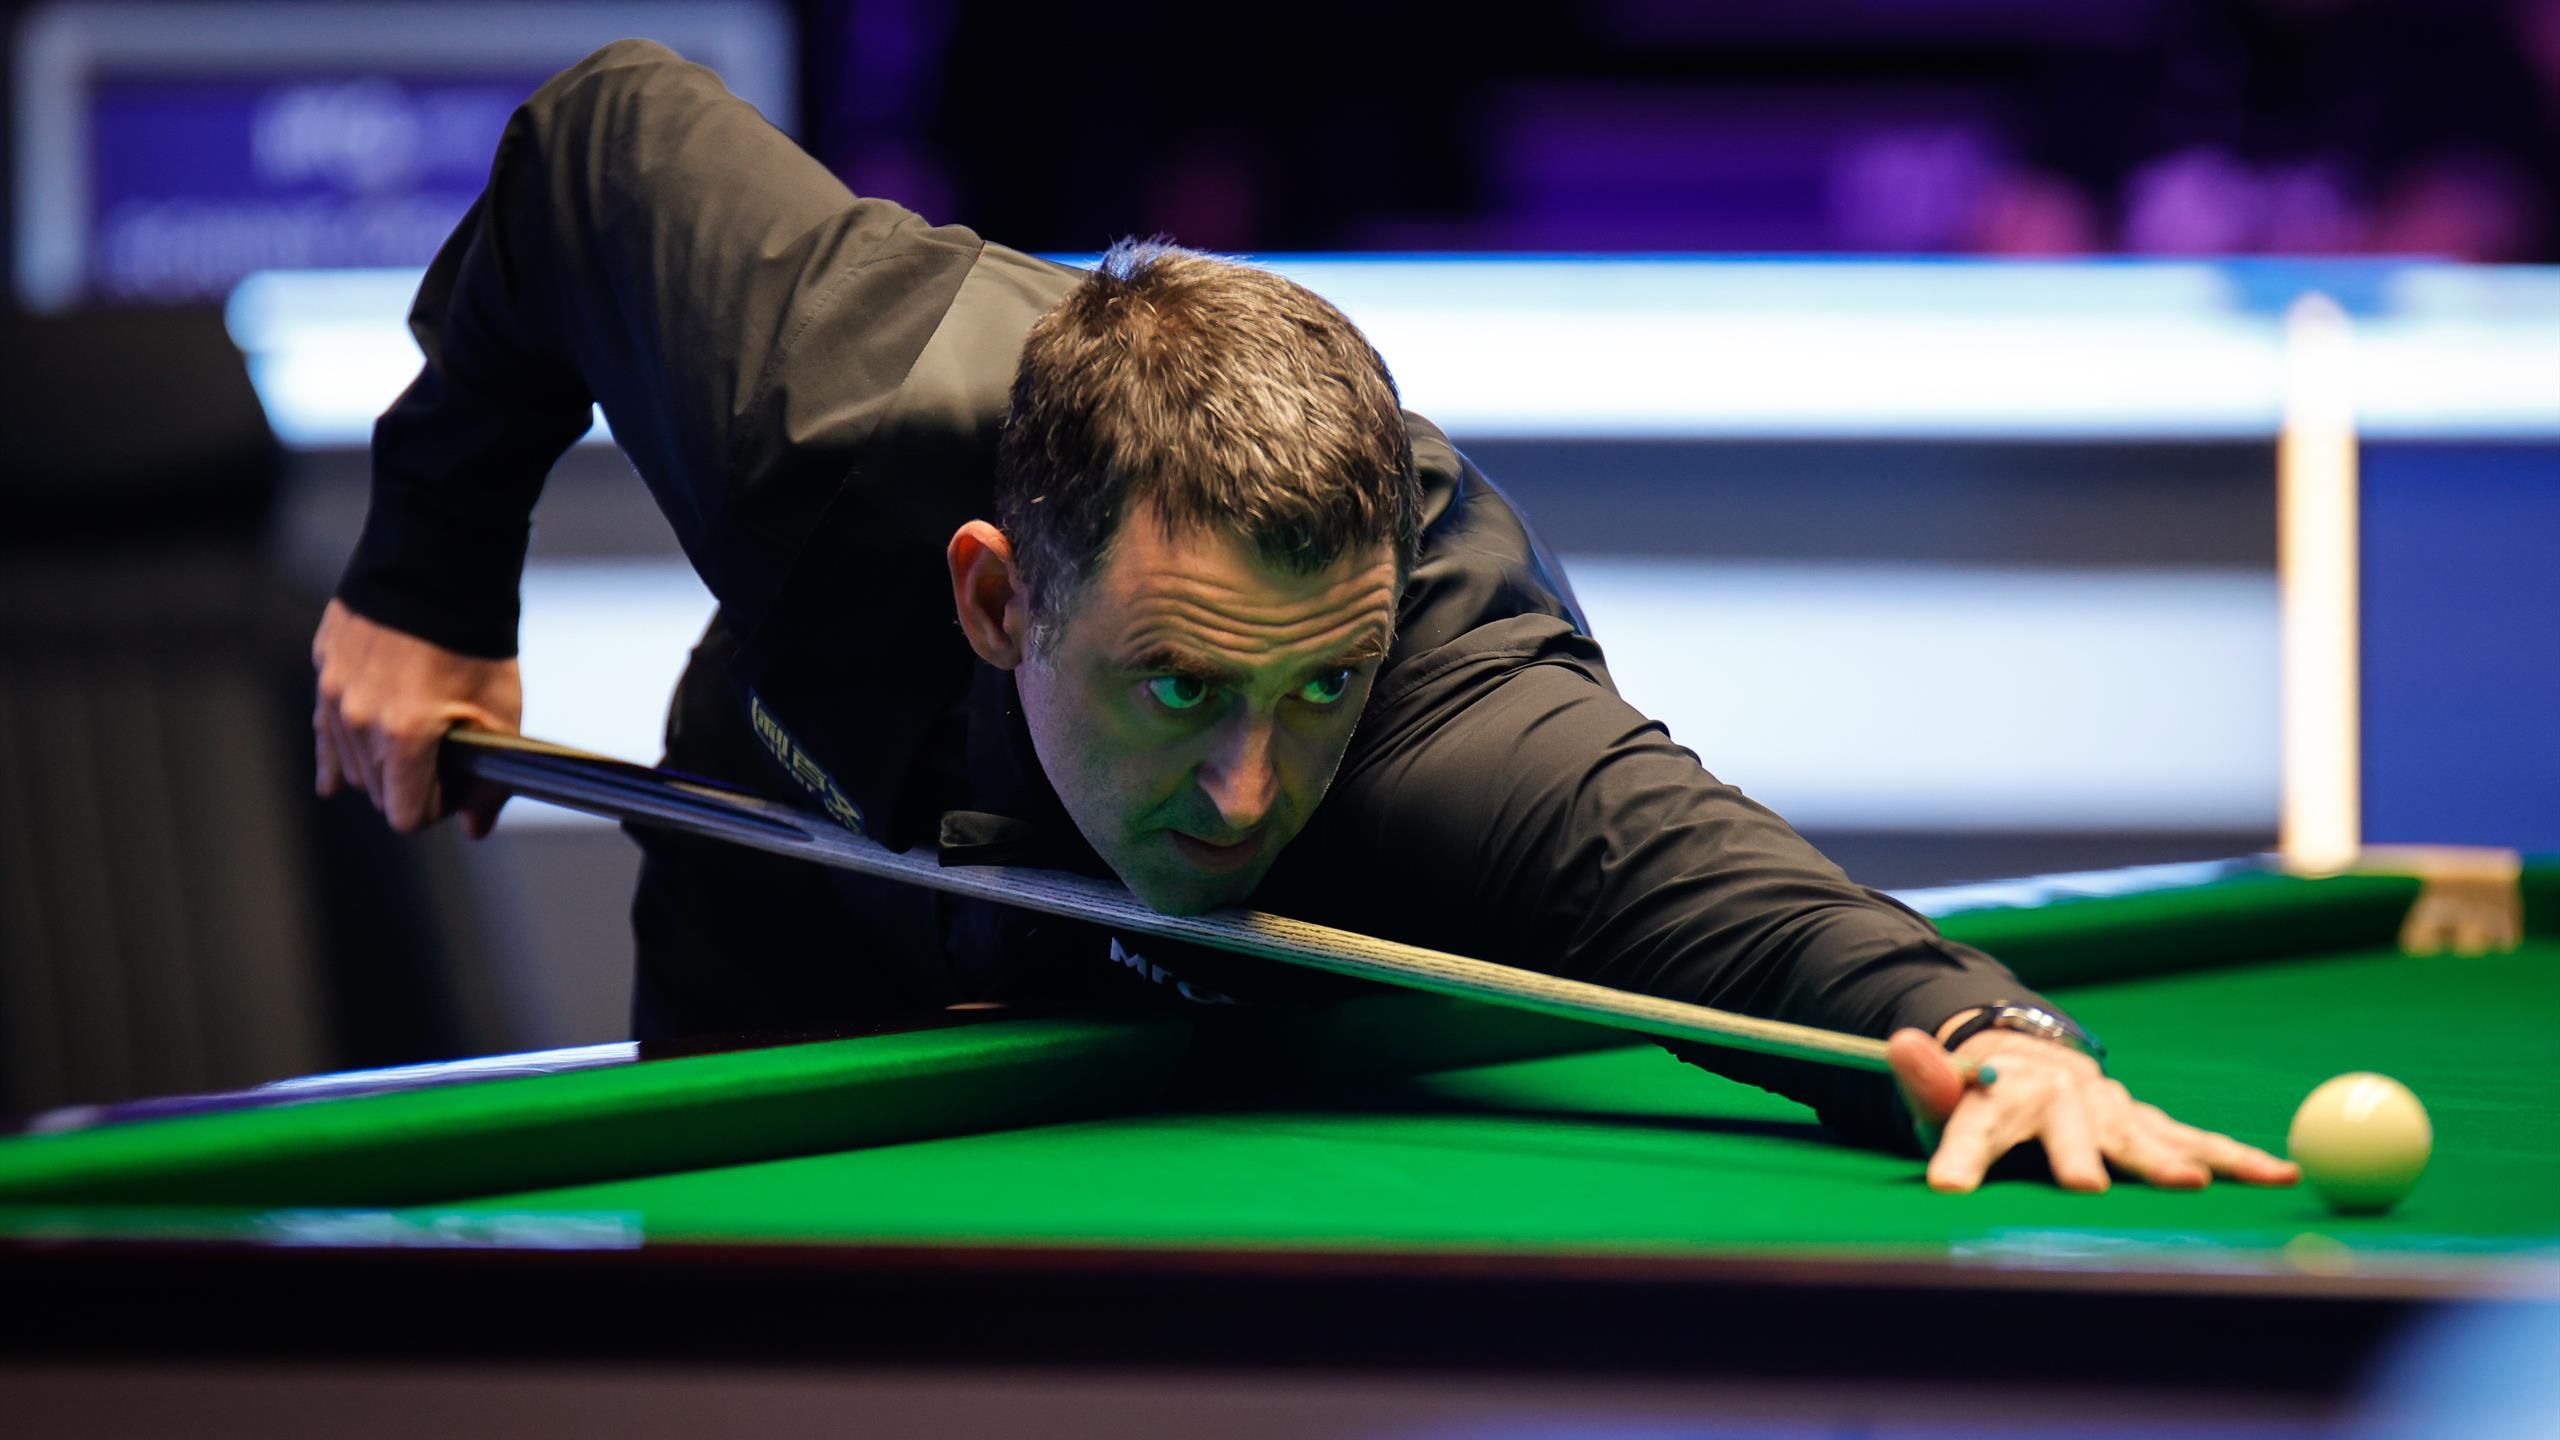 World Grand Prix snooker Ronnie O'Sullivan survives Pang fightback to